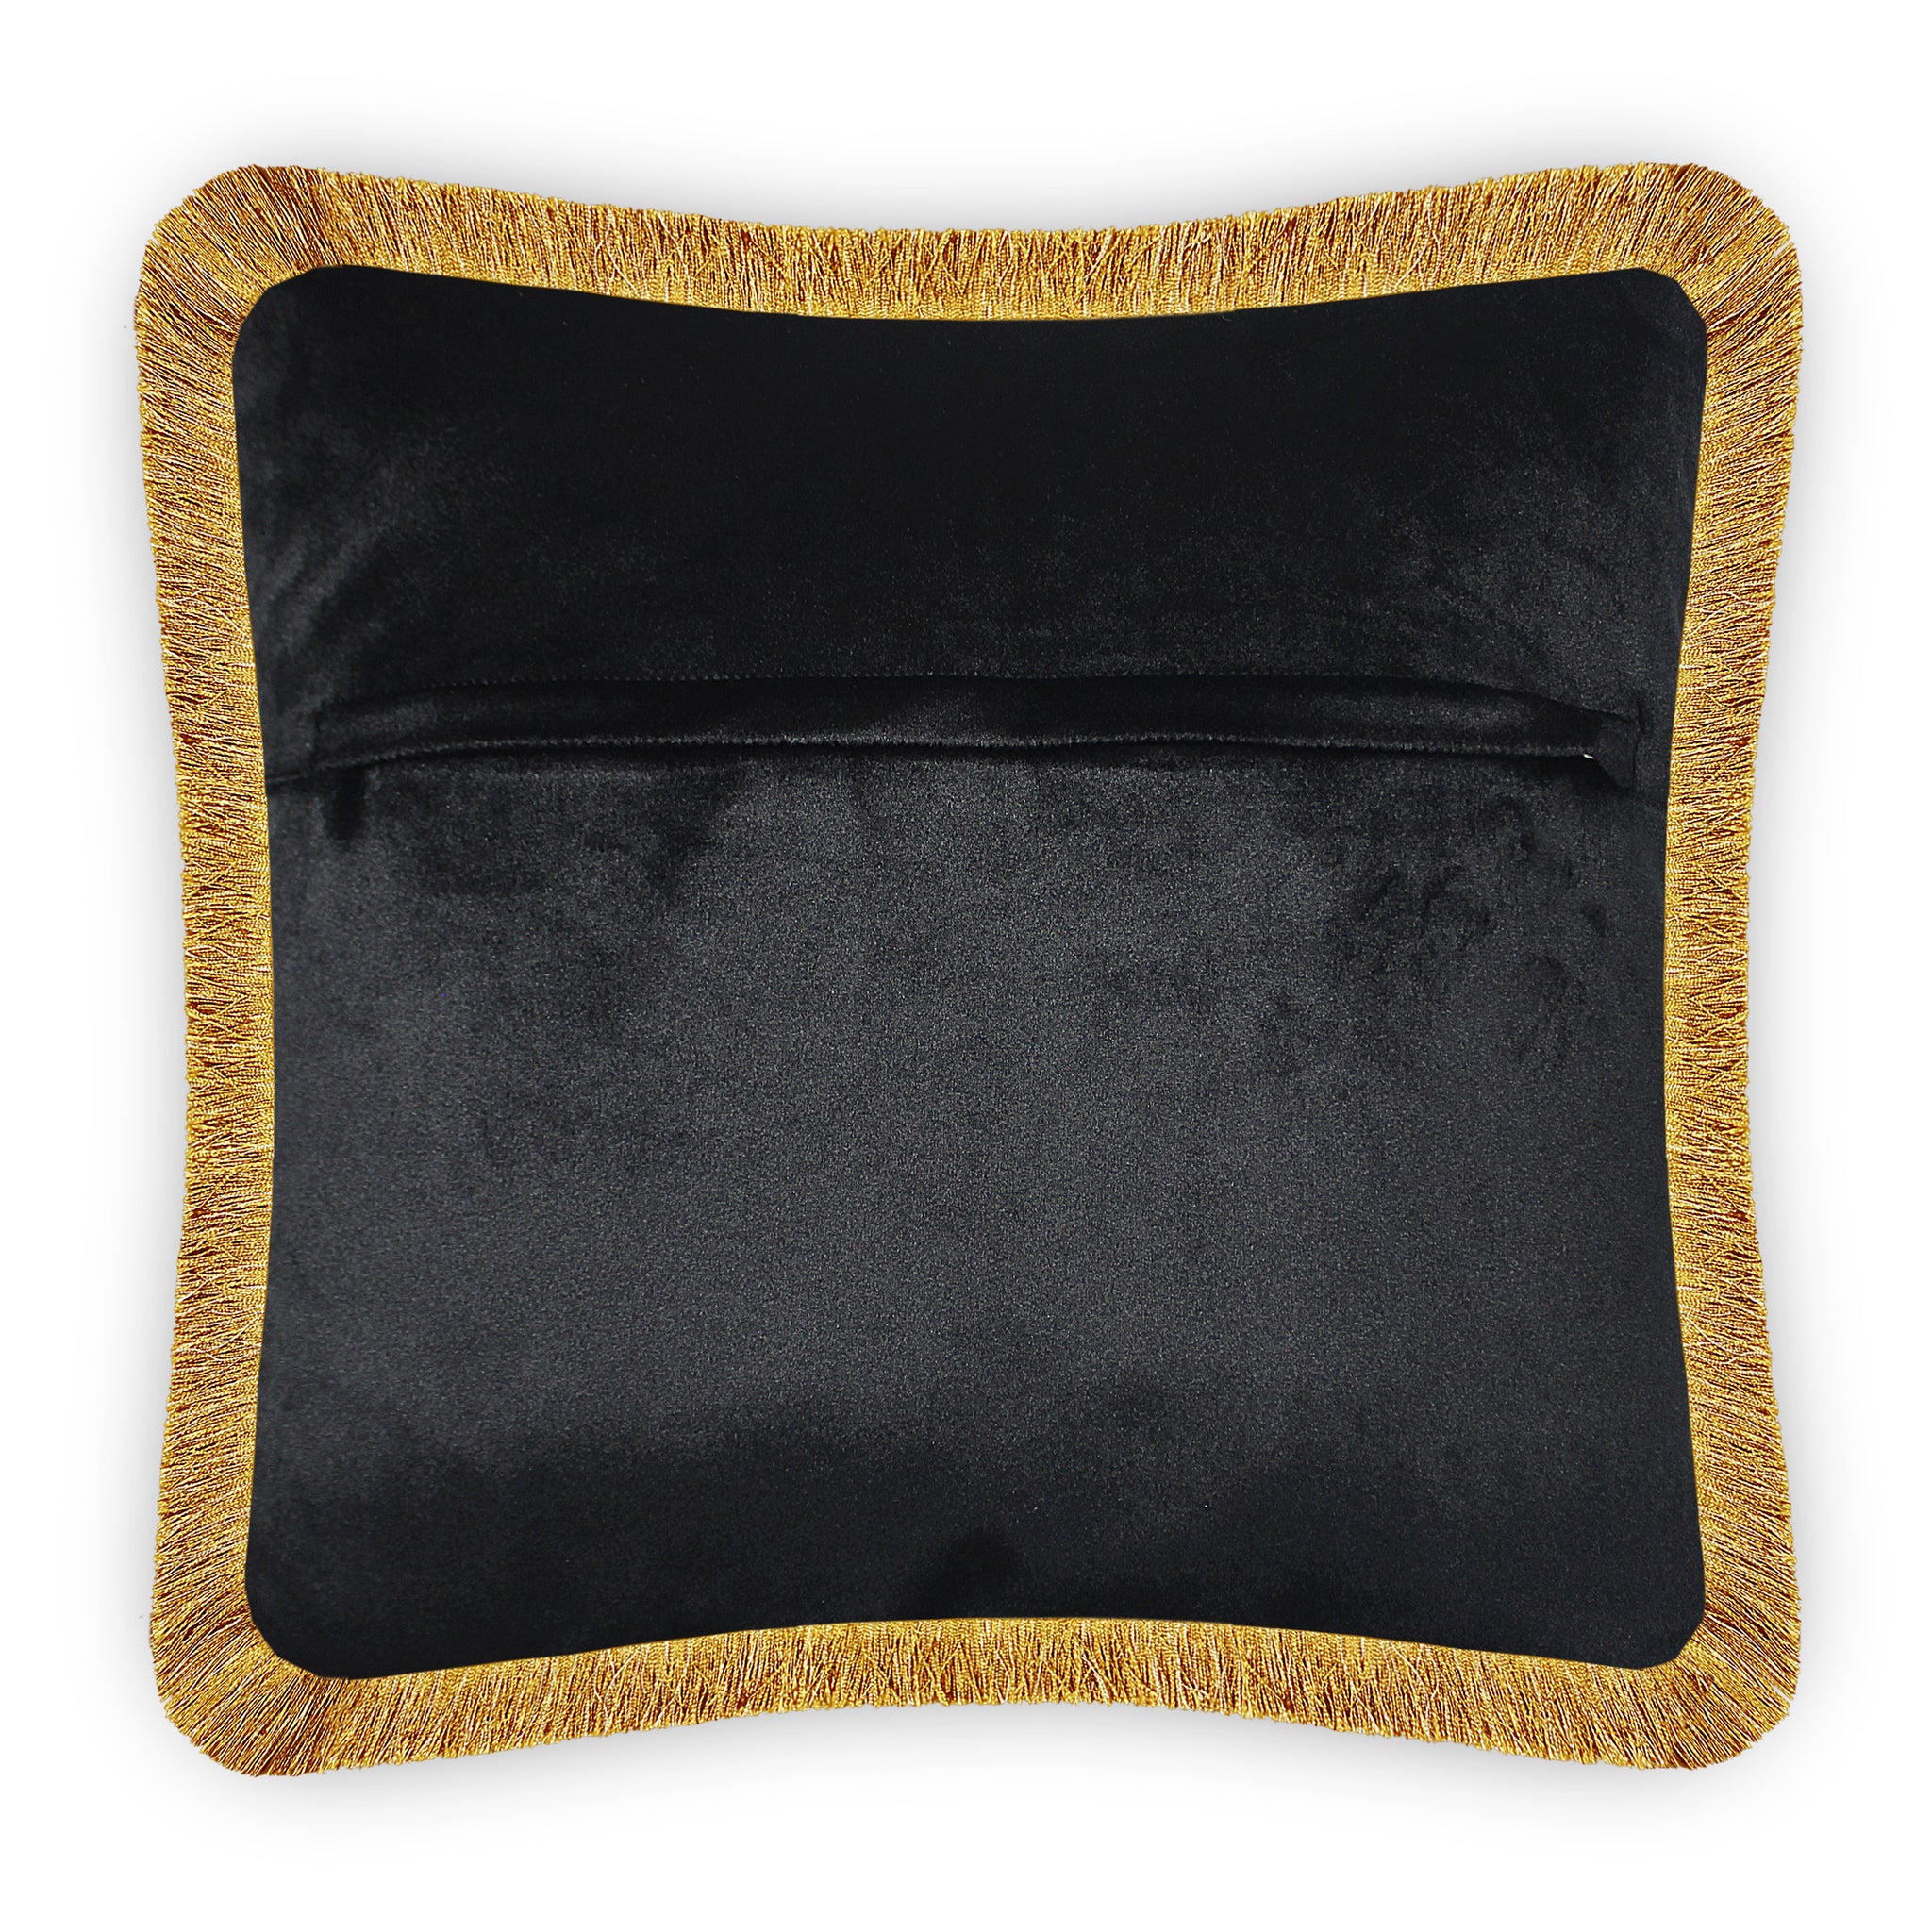 Black Velvet Cushion Cover Colorful Feather Decorative Pillowcase Home Decor Throw Pillow for Sofa Chair Living Room 45x45 cm 18x18 In